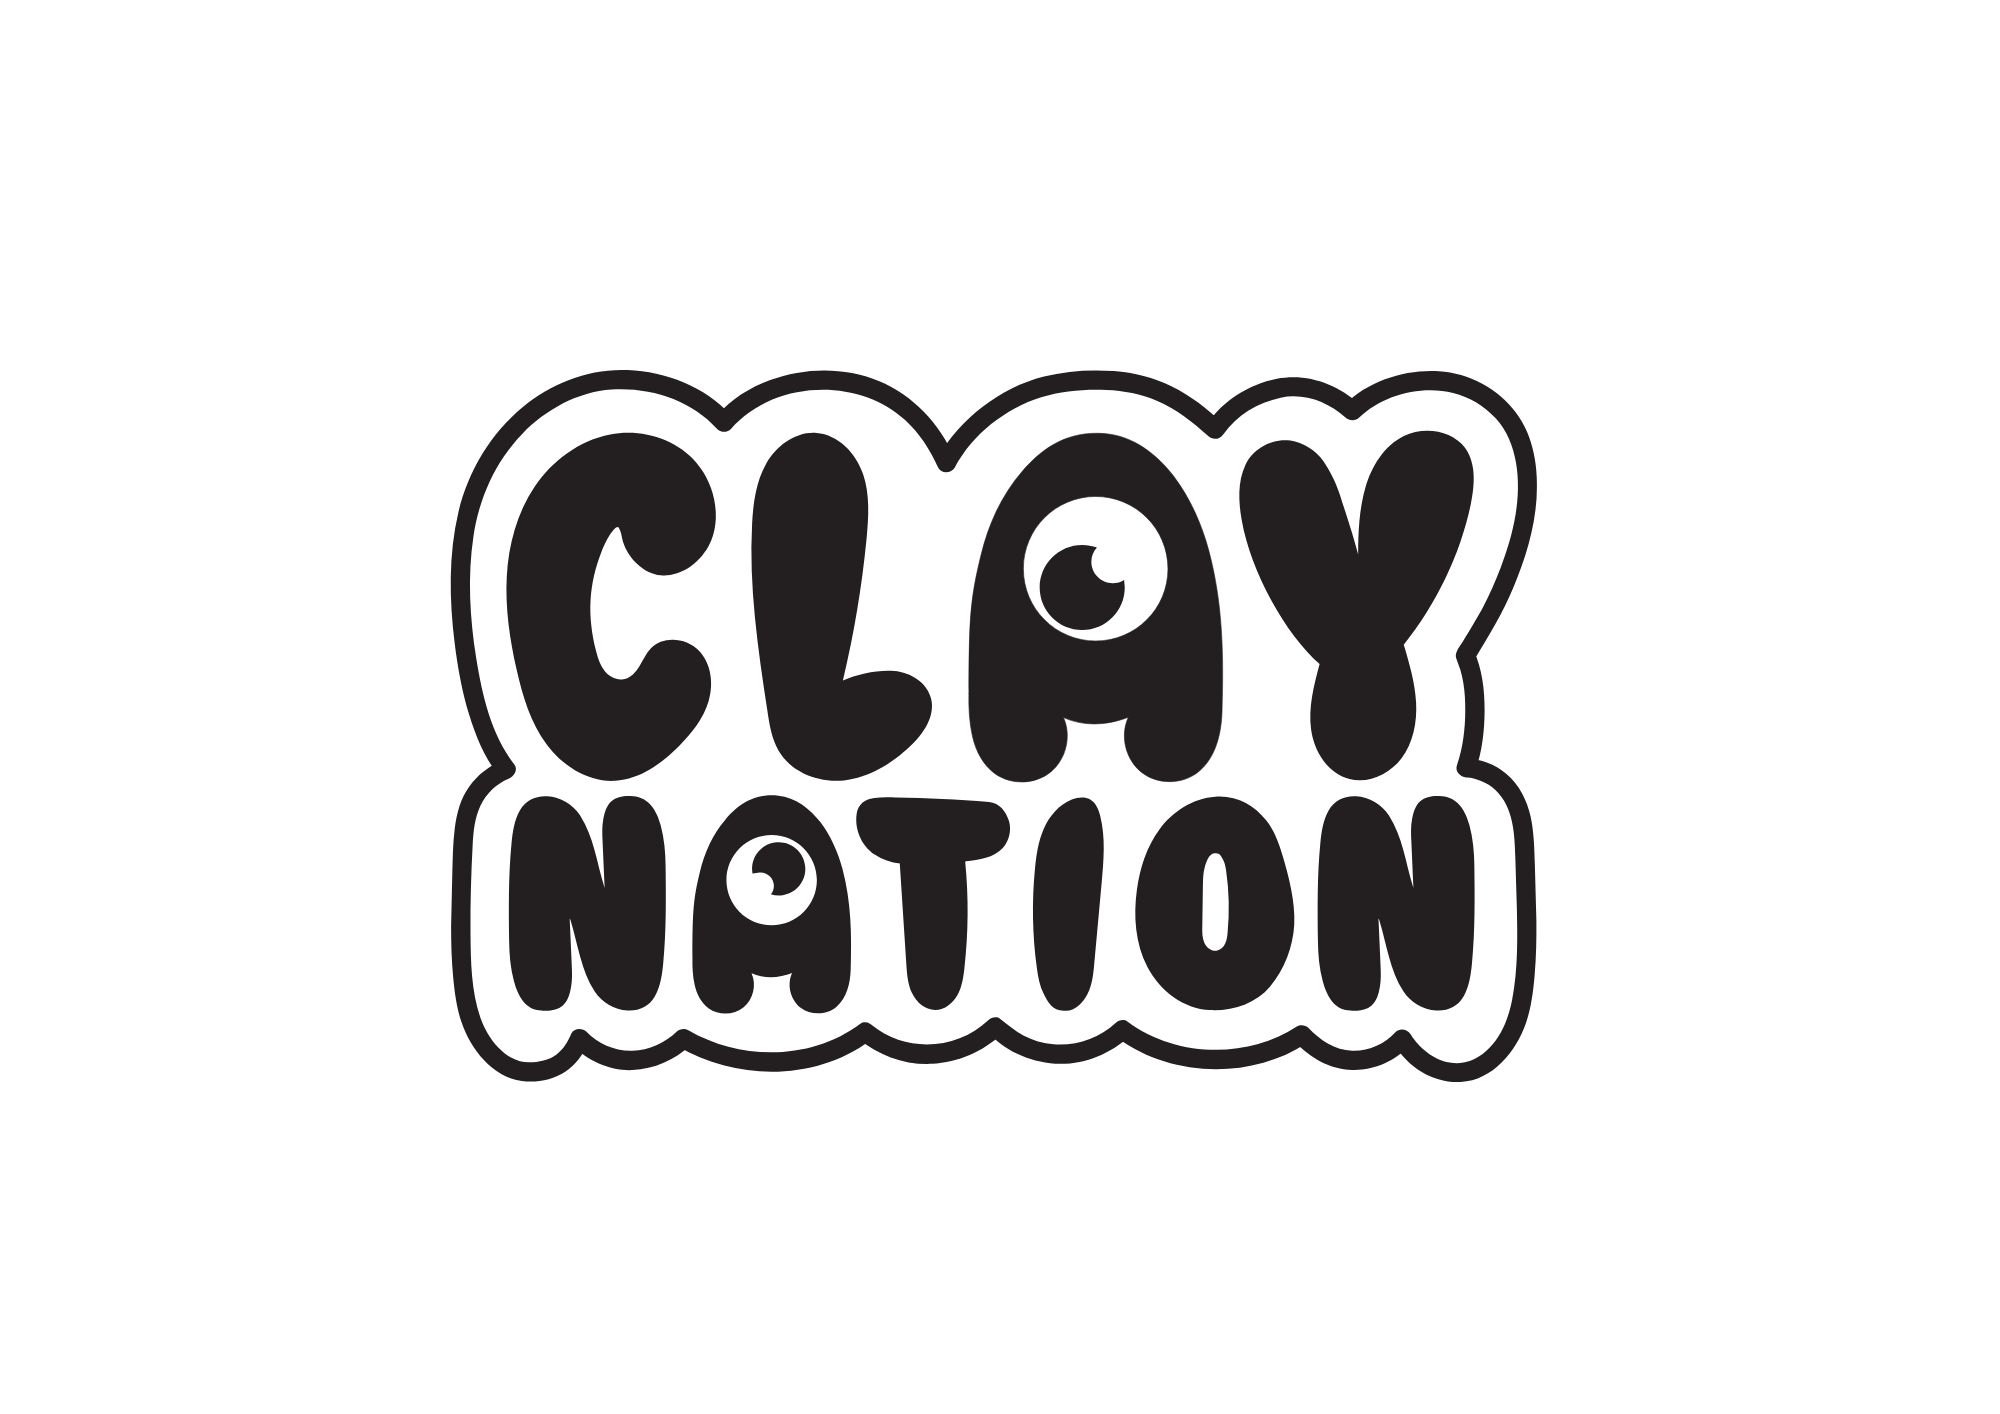 logo clay nation pitches